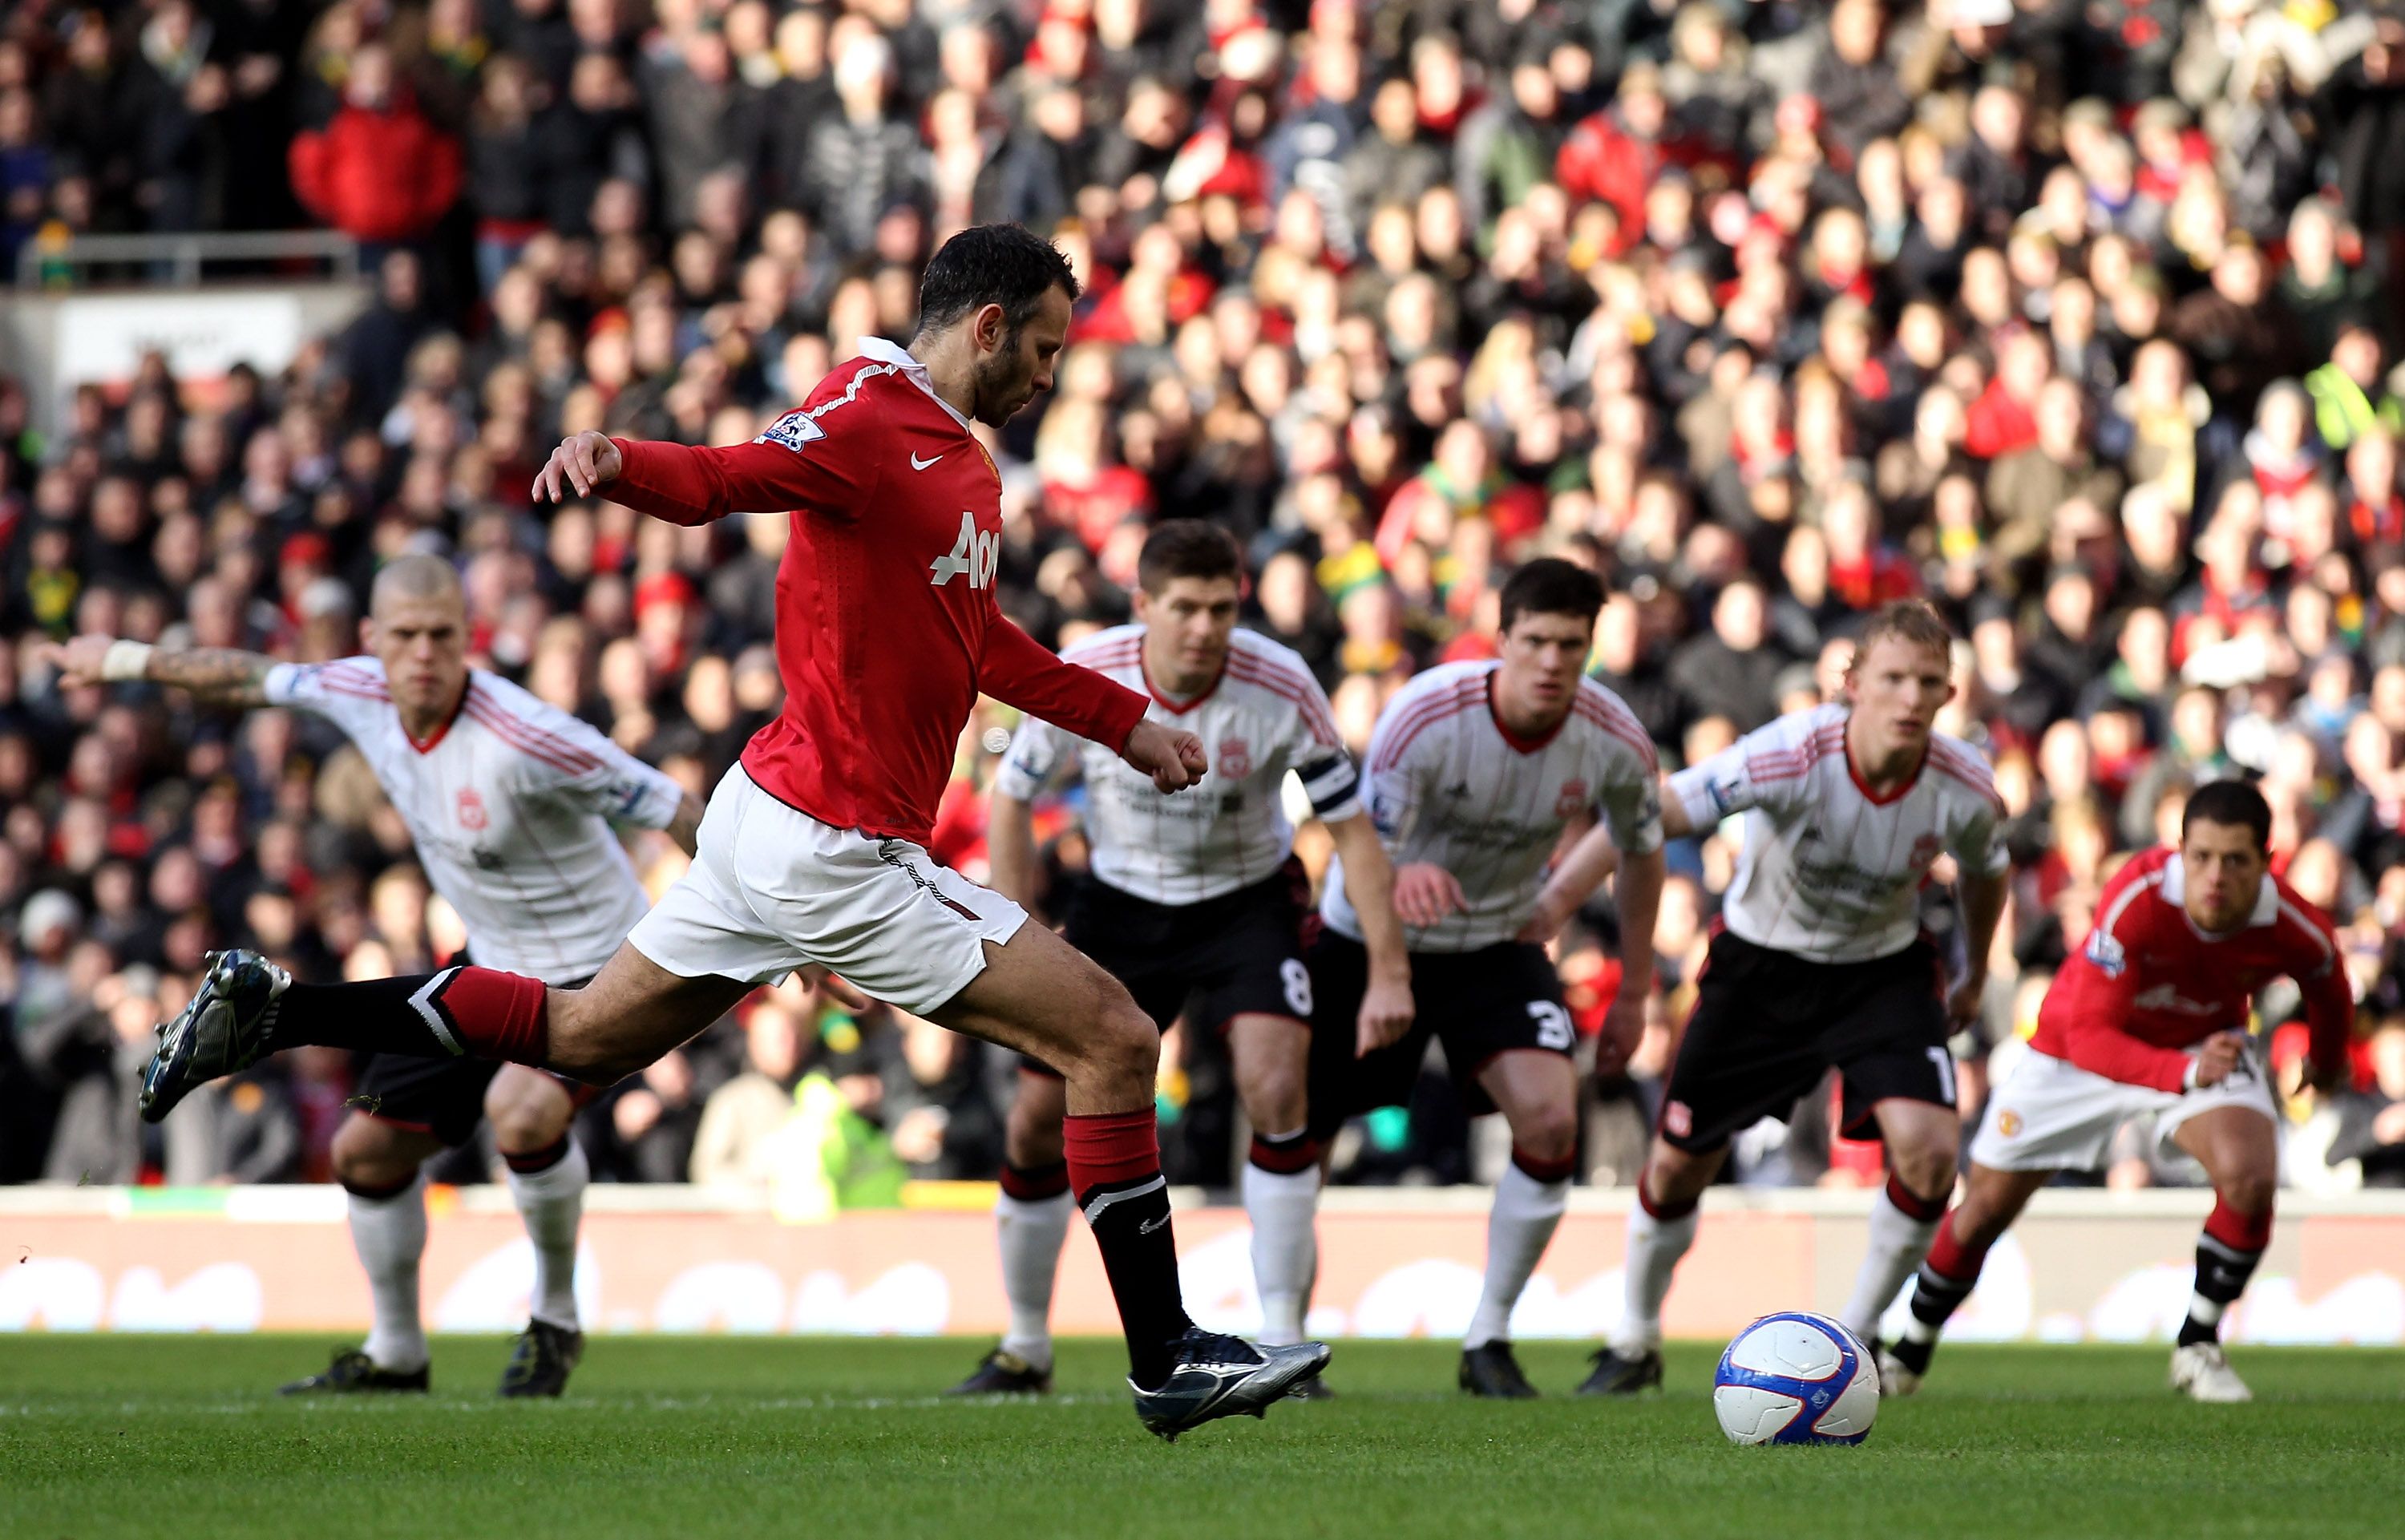 MANCHESTER, ENGLAND - JANUARY 09: Ryan Giggs of Manchester United scores the opening goal from a penalty kick during the FA Cup sponsored by E.ON 3rd round match between Manchester United and Liverpool at Old Trafford on January 9, 2011 in Manchester, England. (Photo by Alex Livesey/Getty Images)